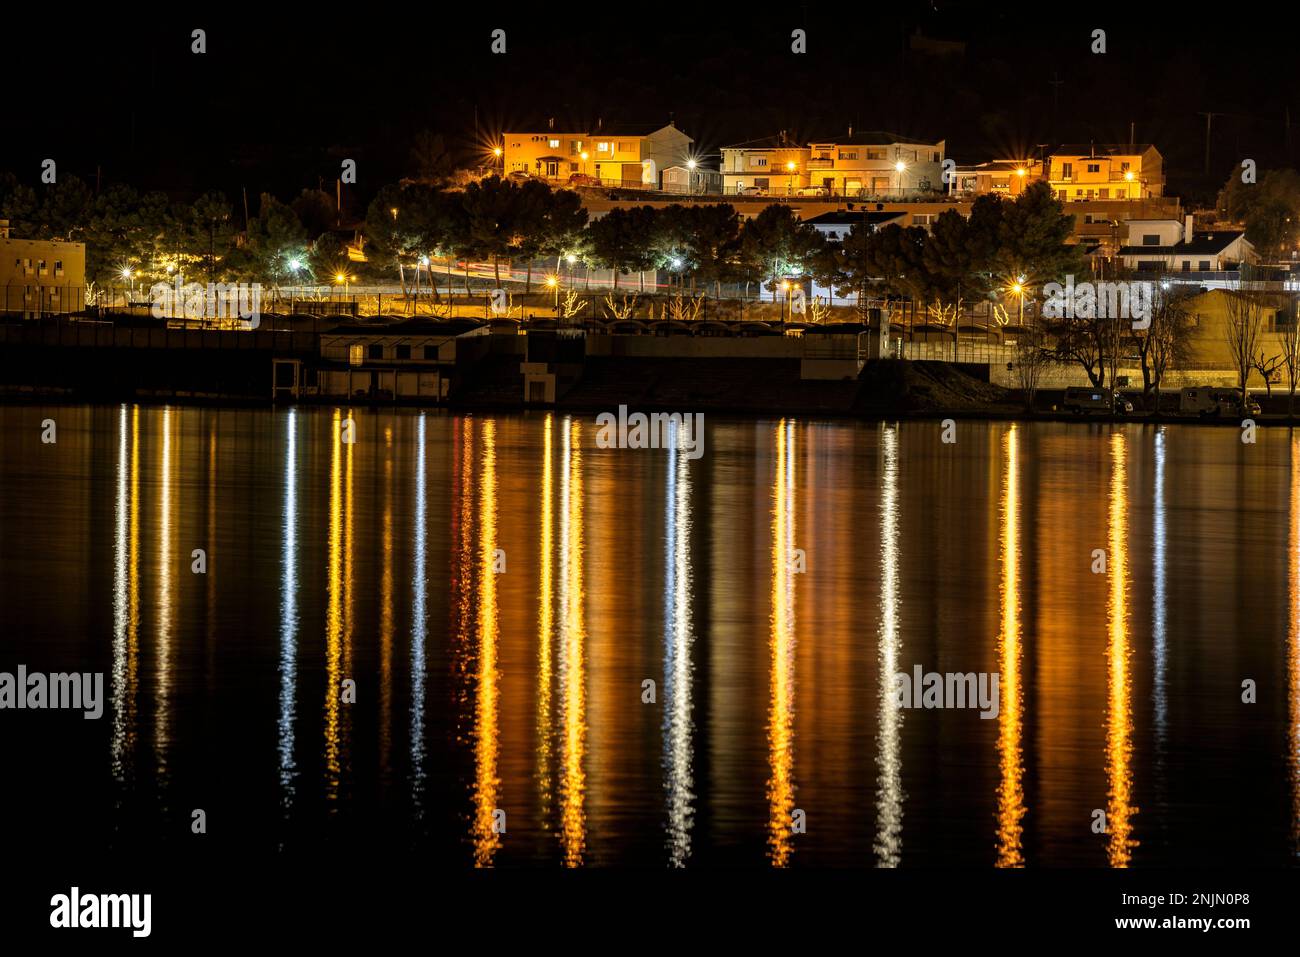 Mequinenza town and castle in the blue hour and at night, with the reflection in the waters of the Segre river (Bajo Cinca, Zaragoza, Aragon, Spain) Stock Photo